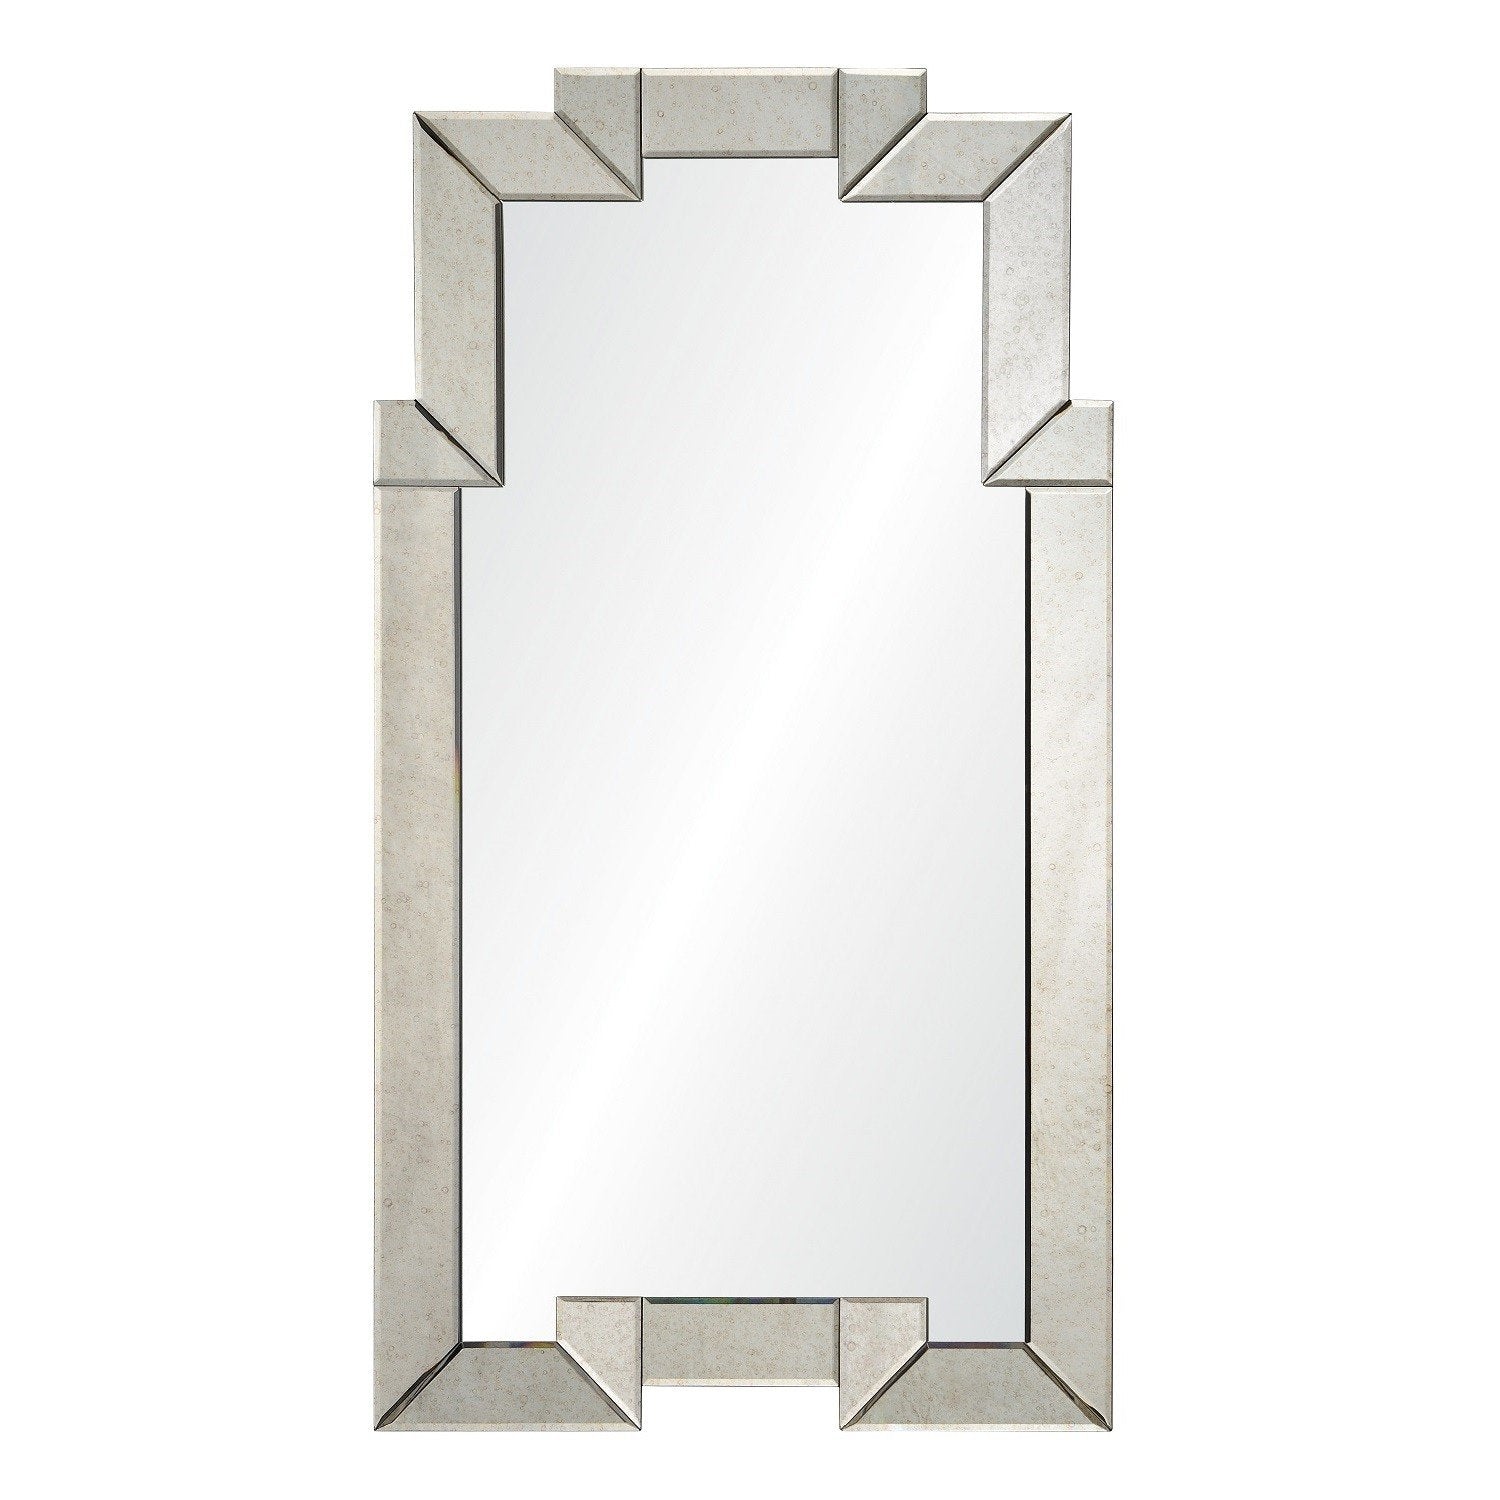 Antiqued Mirror Framed Mirror by Barclay Butera | Mirror Image Home